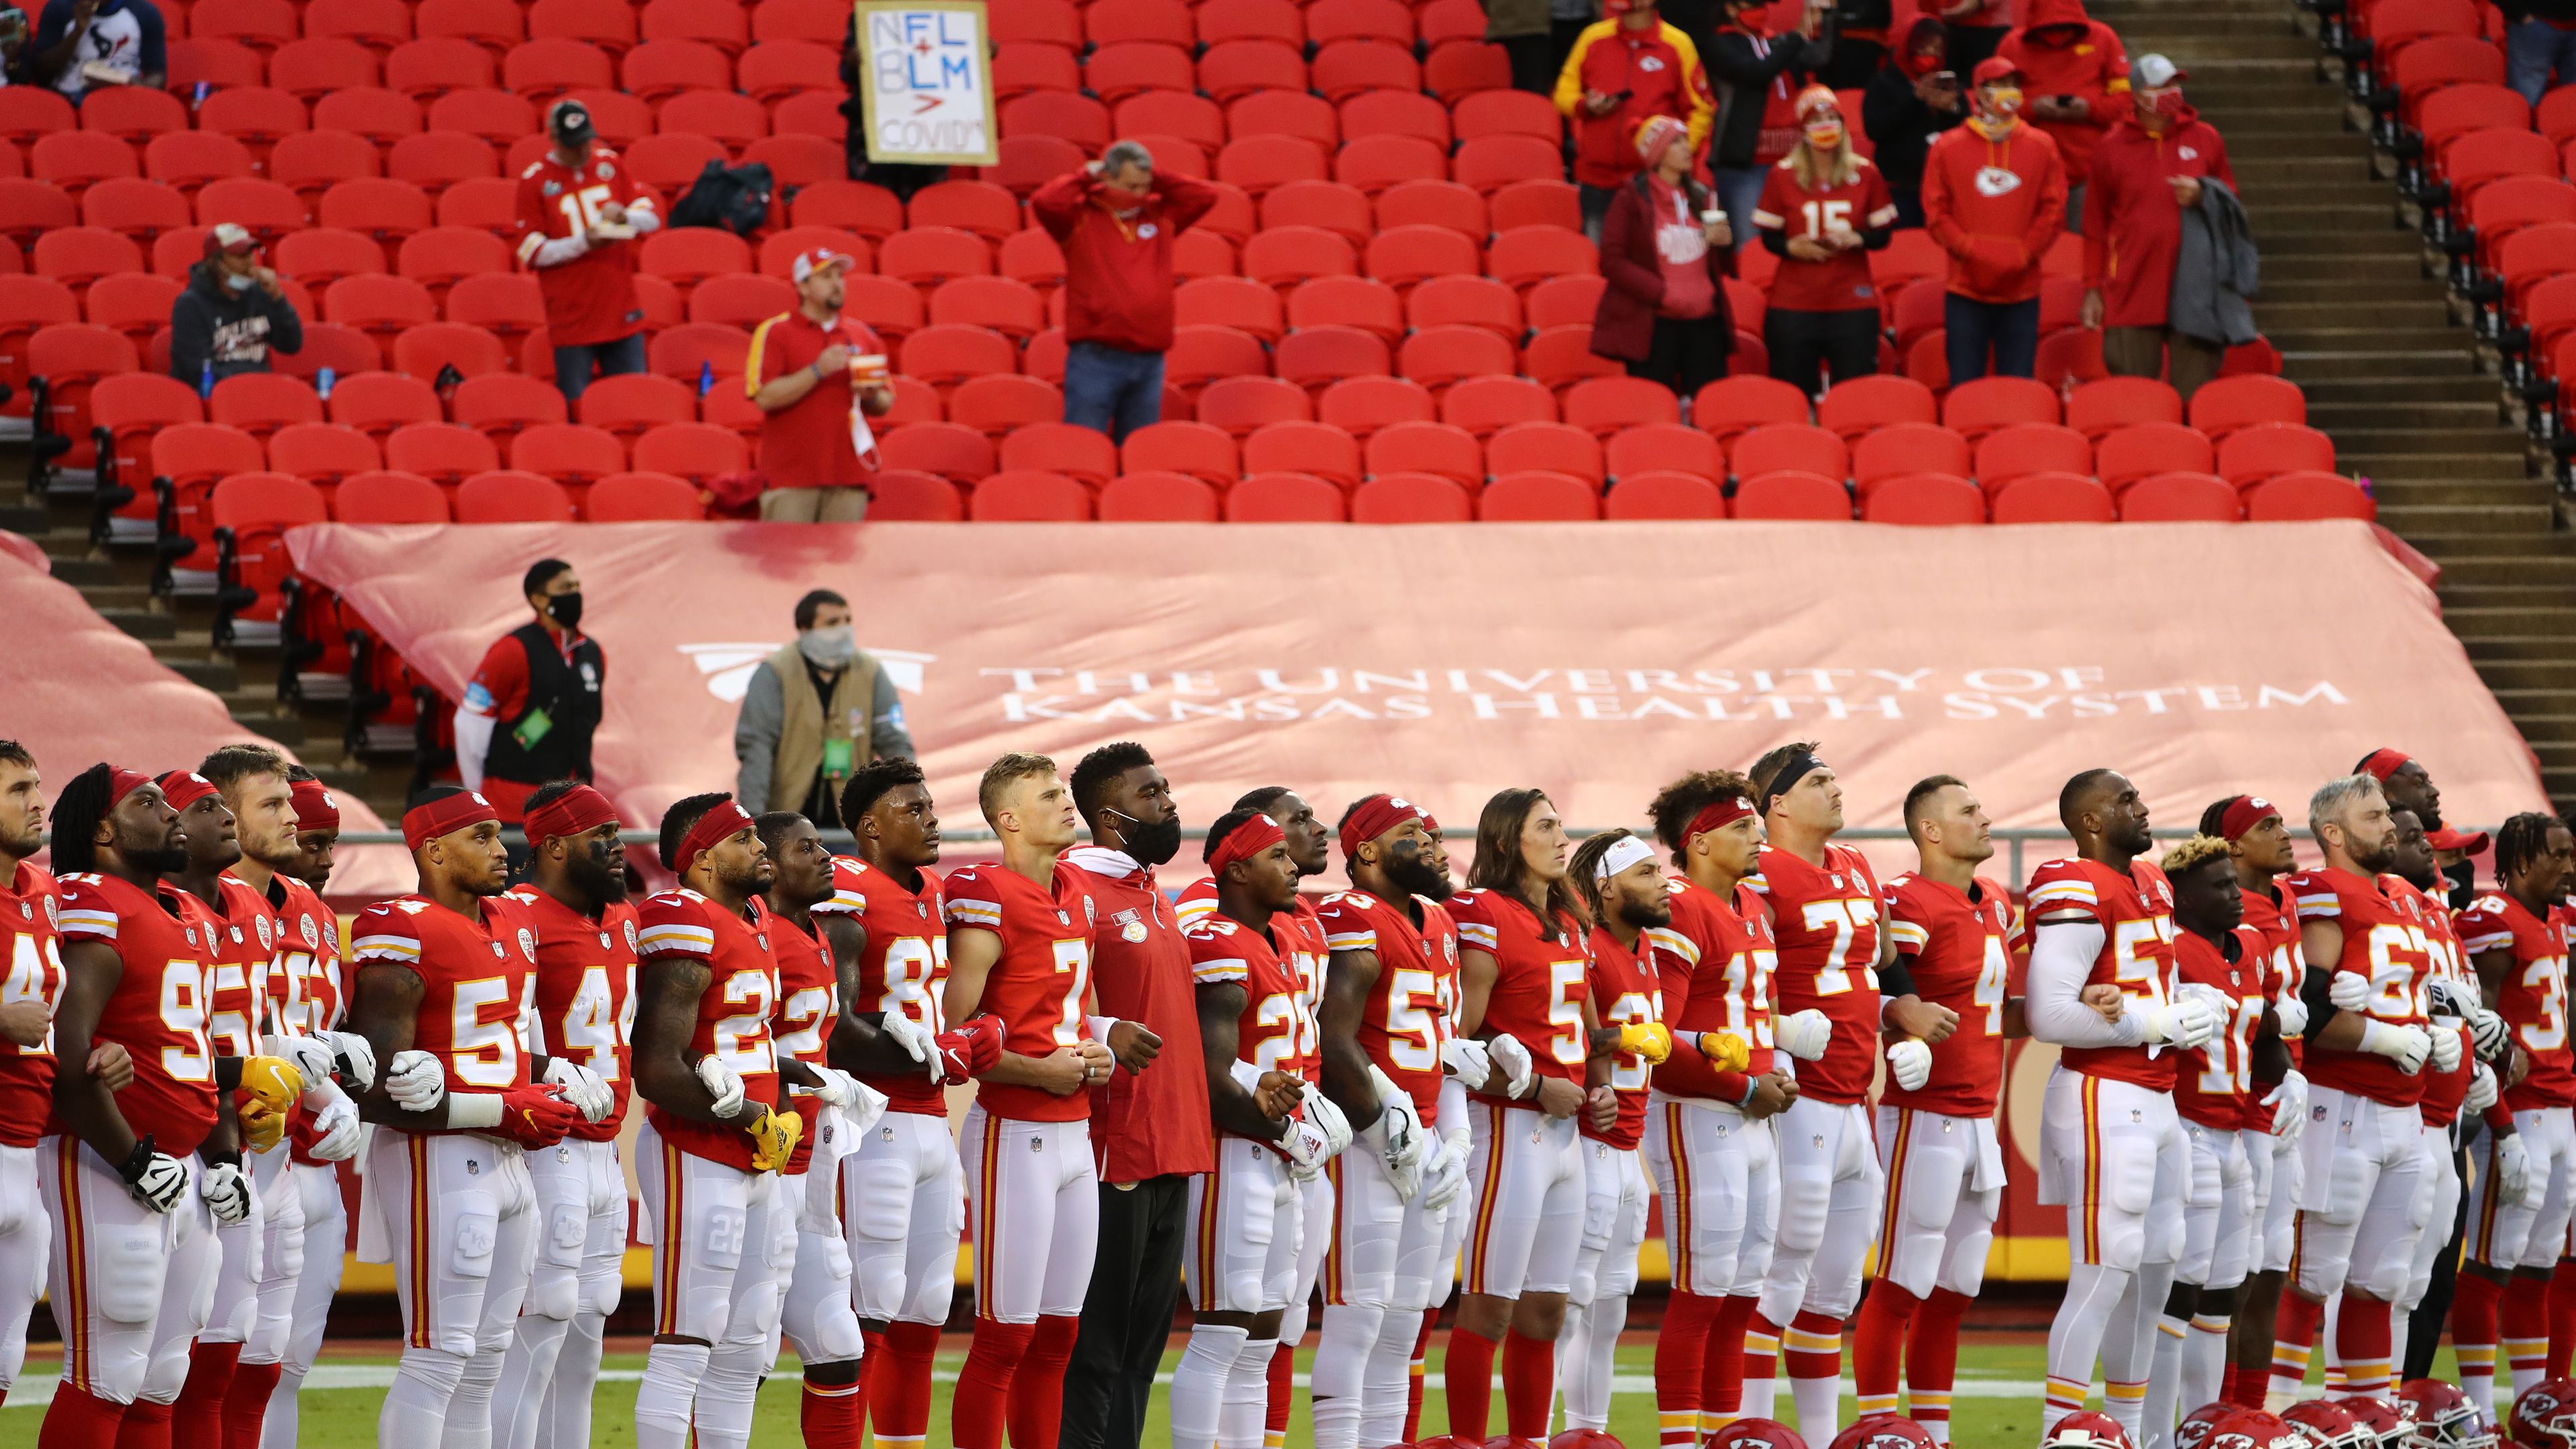 NFL season opener marred by crowd booing during pre-game 'moment of unity'